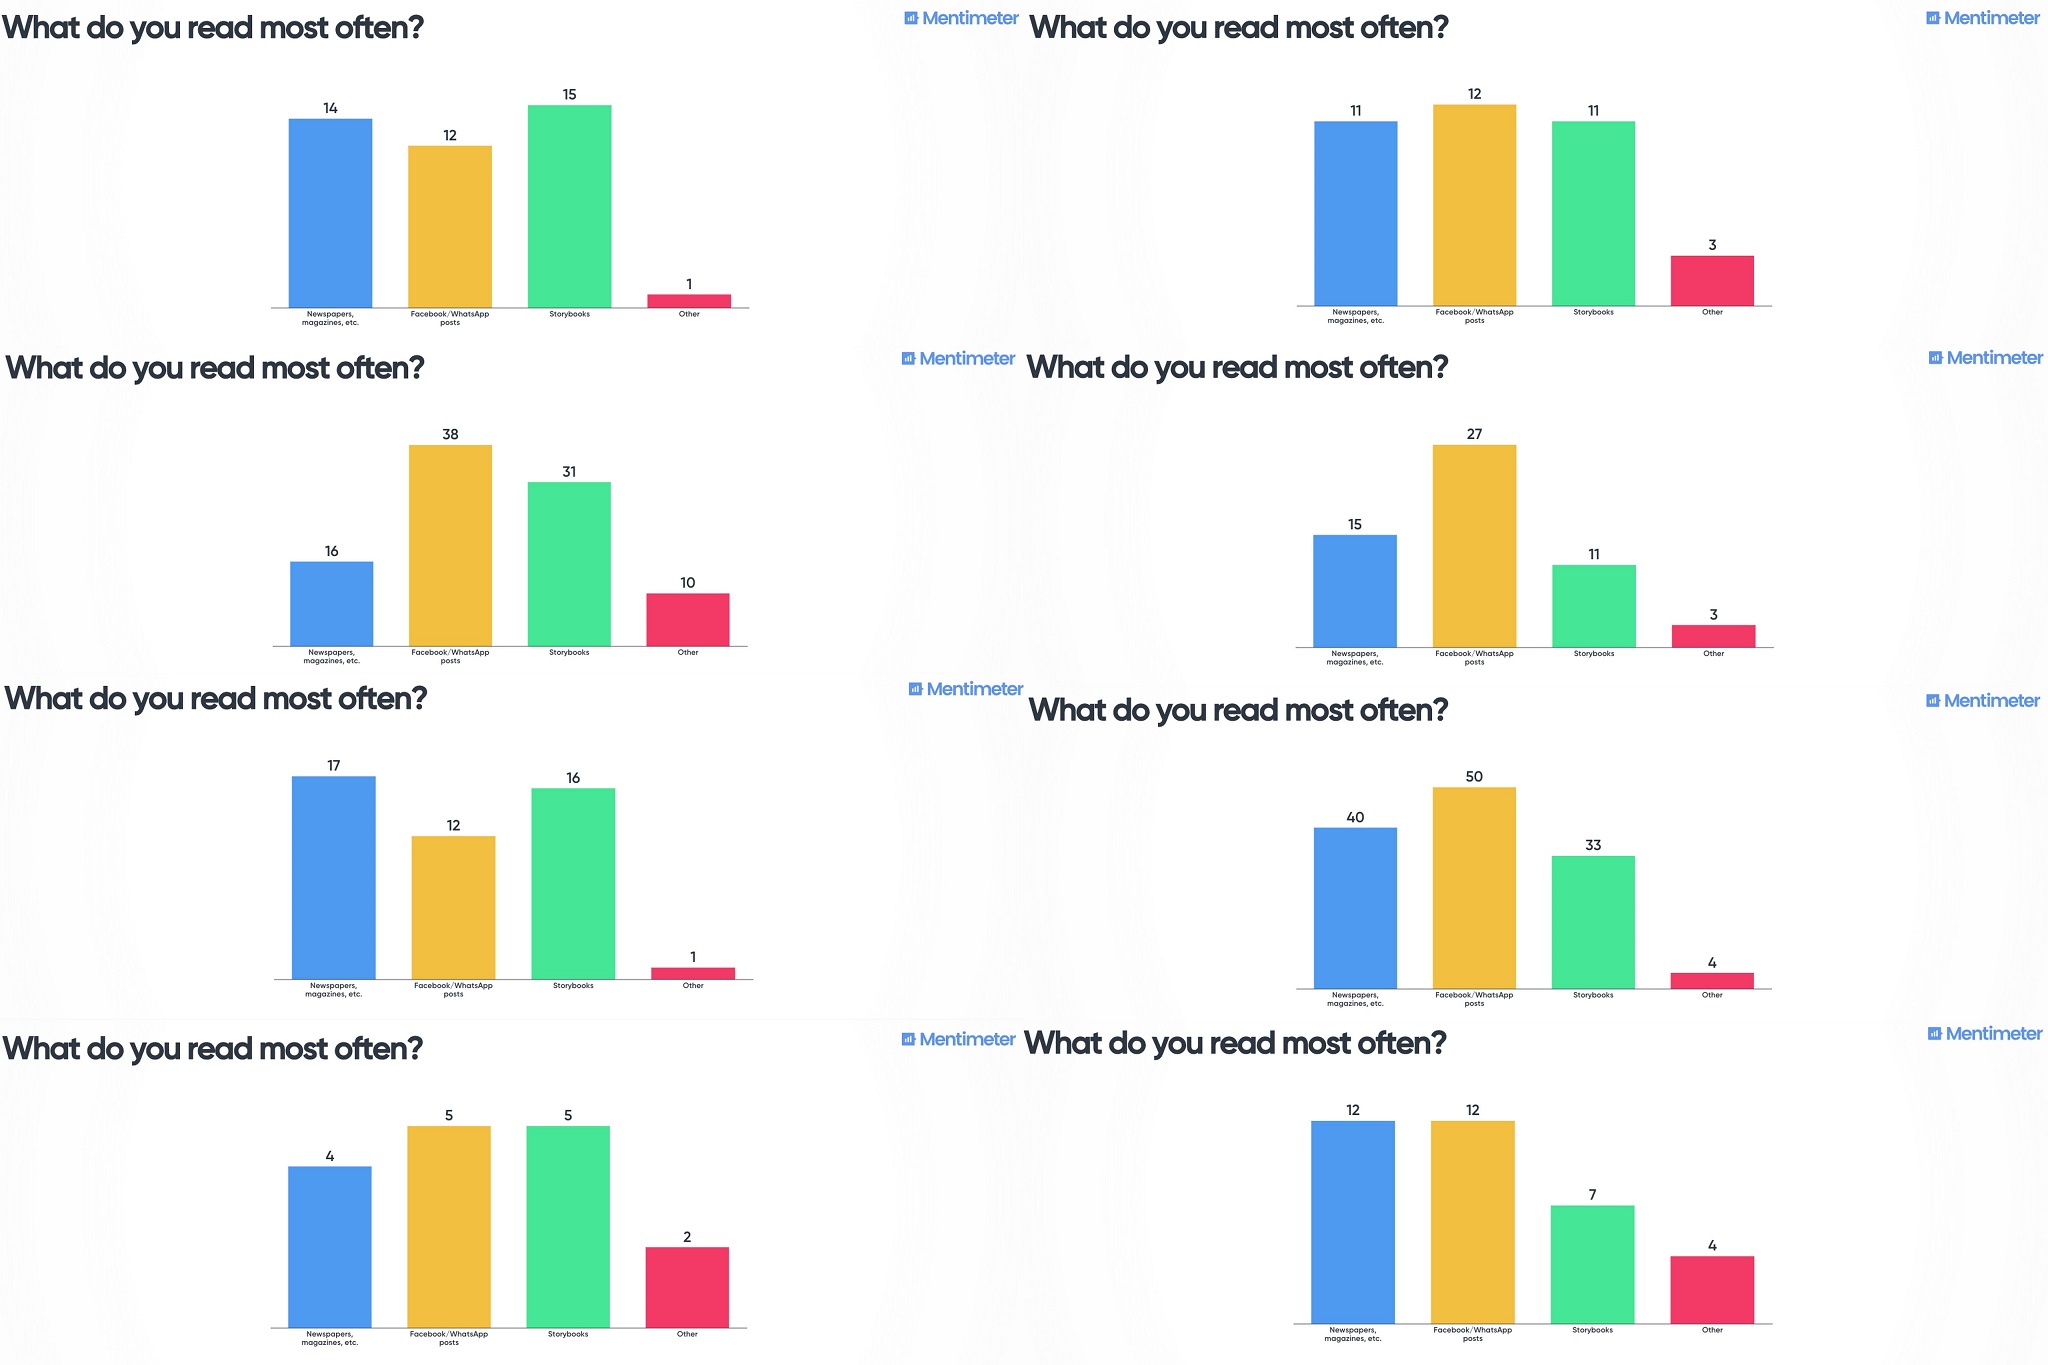 Graphs showing what people read most often - no conclusive data